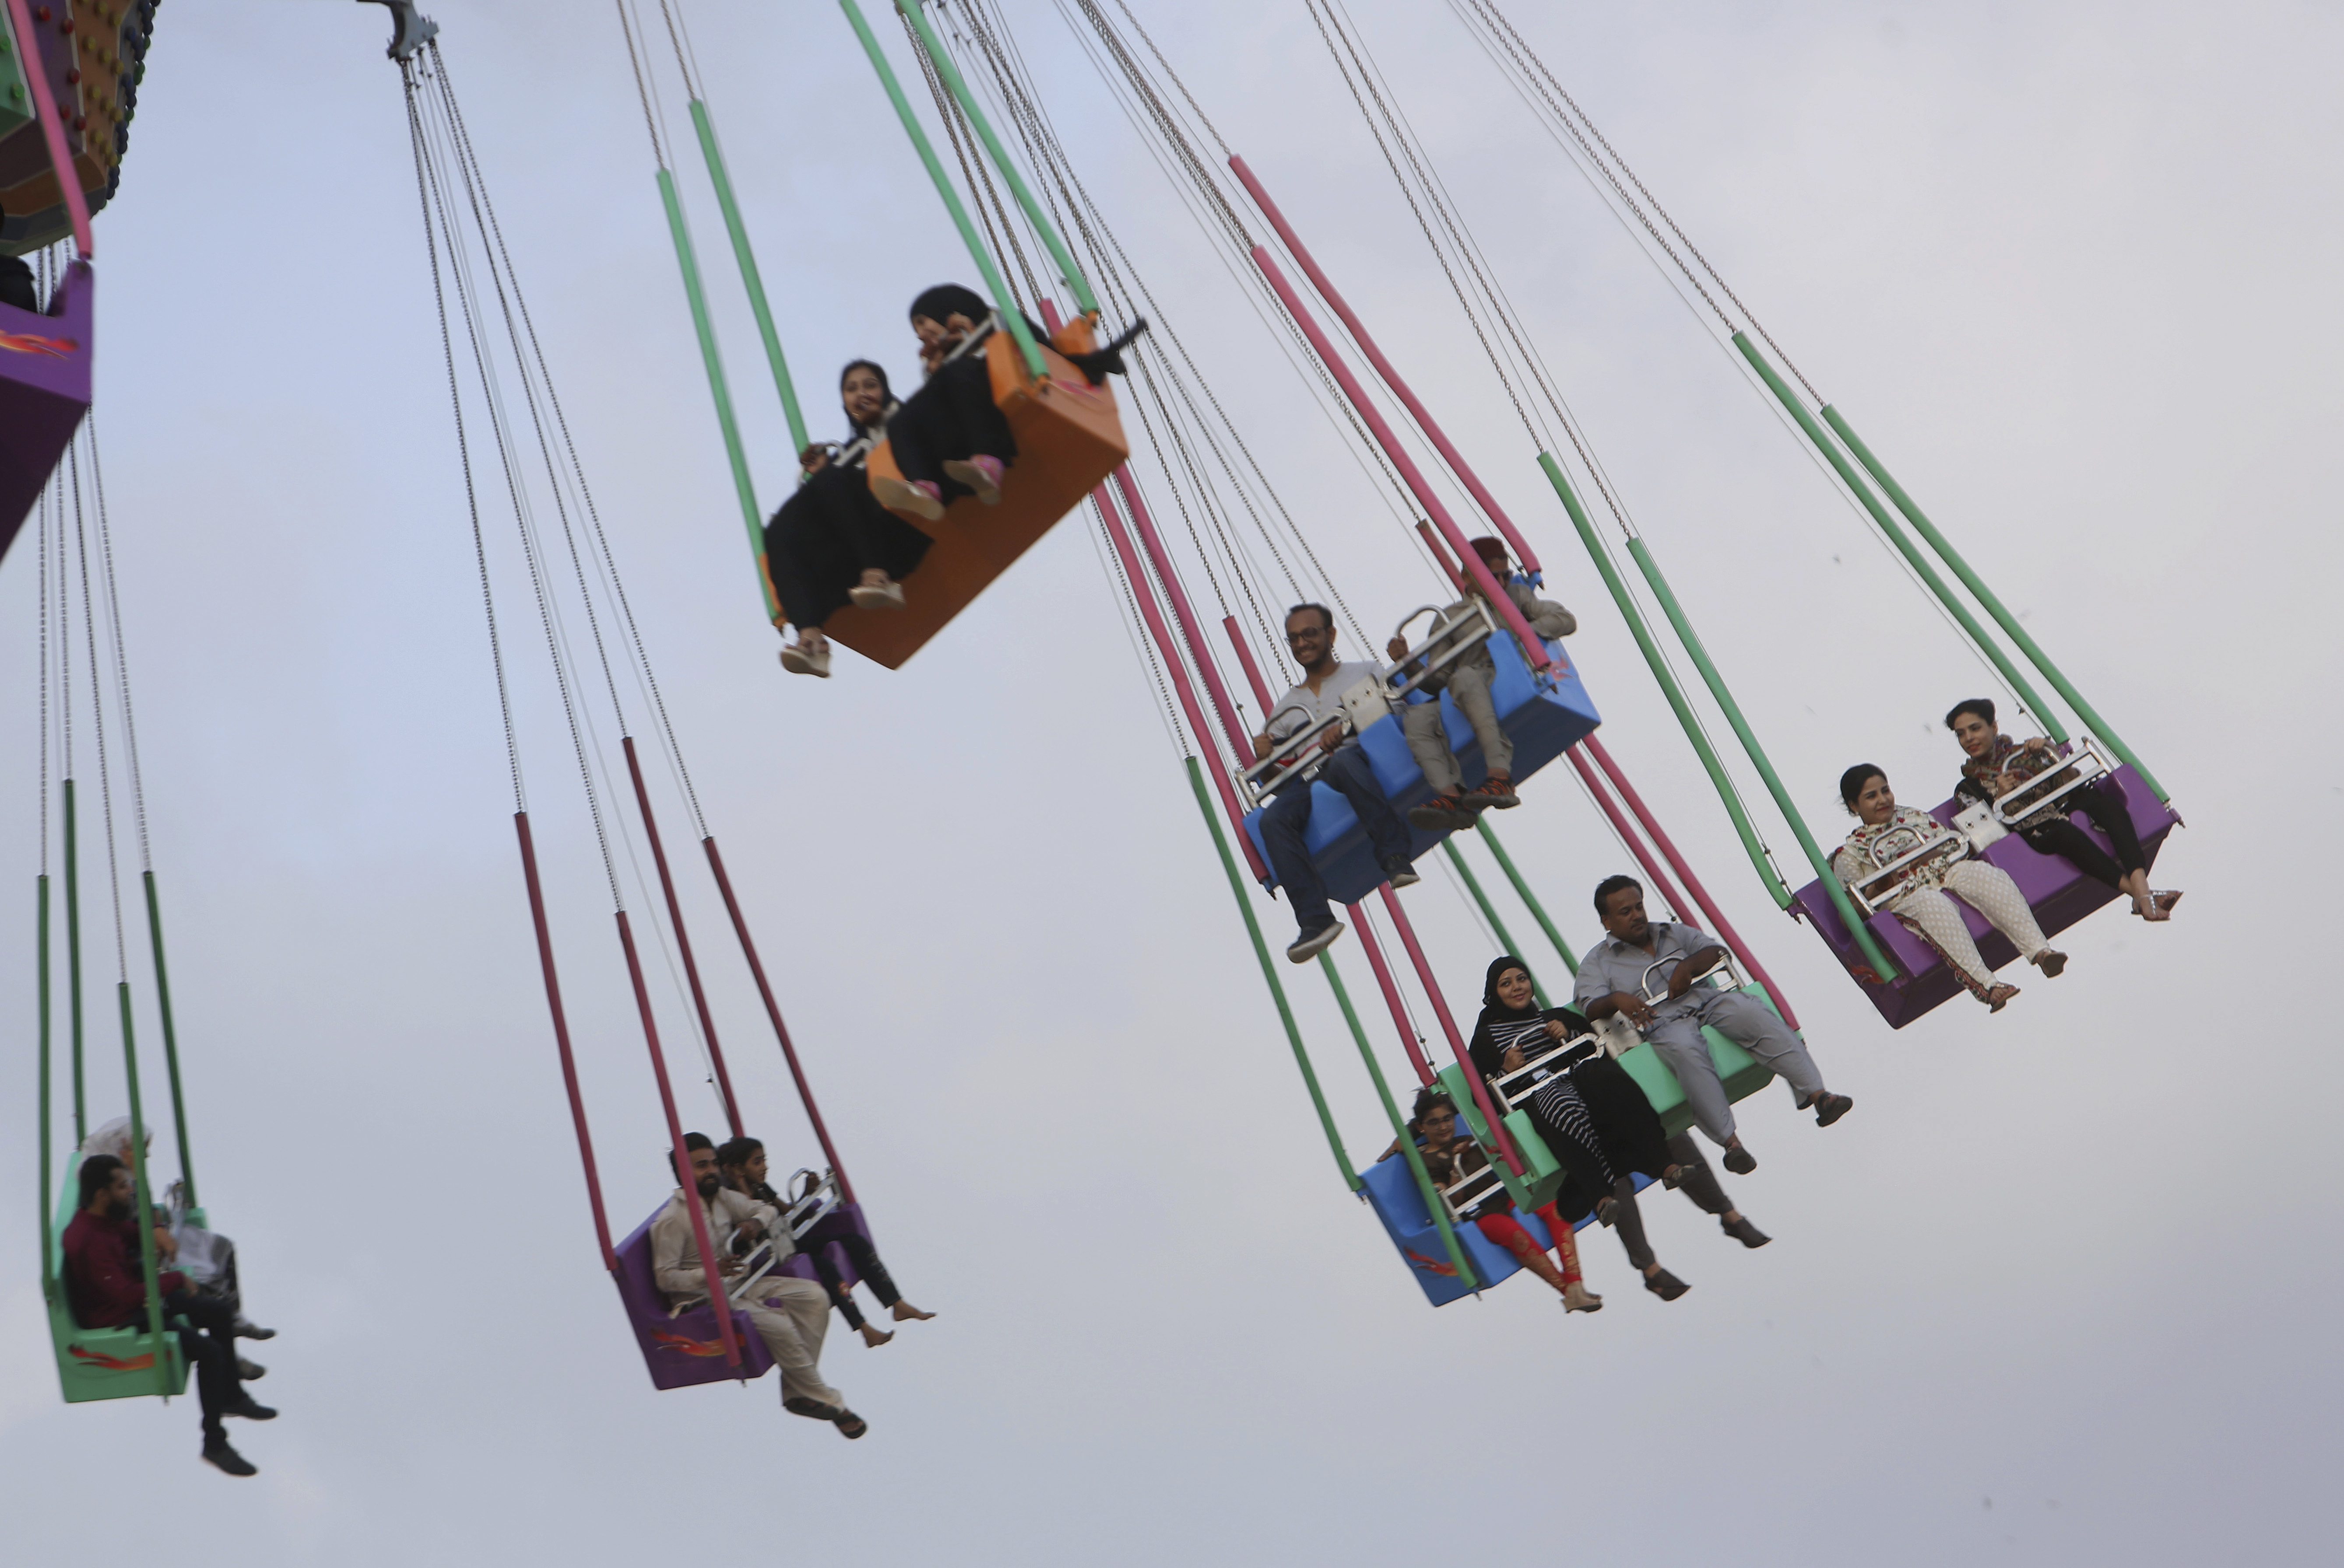 People enjoy a ride at a fair to celebrate the Eid al-Fitr holidays in Karachi, Pakistan, Saturday, June 16, 2018. Eid al-Fitr marks the end of the Islamic holy Islamic month of Ramadan, during which devout Muslims all over the world fast from sunrise to sunset. (AP Photo/Fareed Khan)